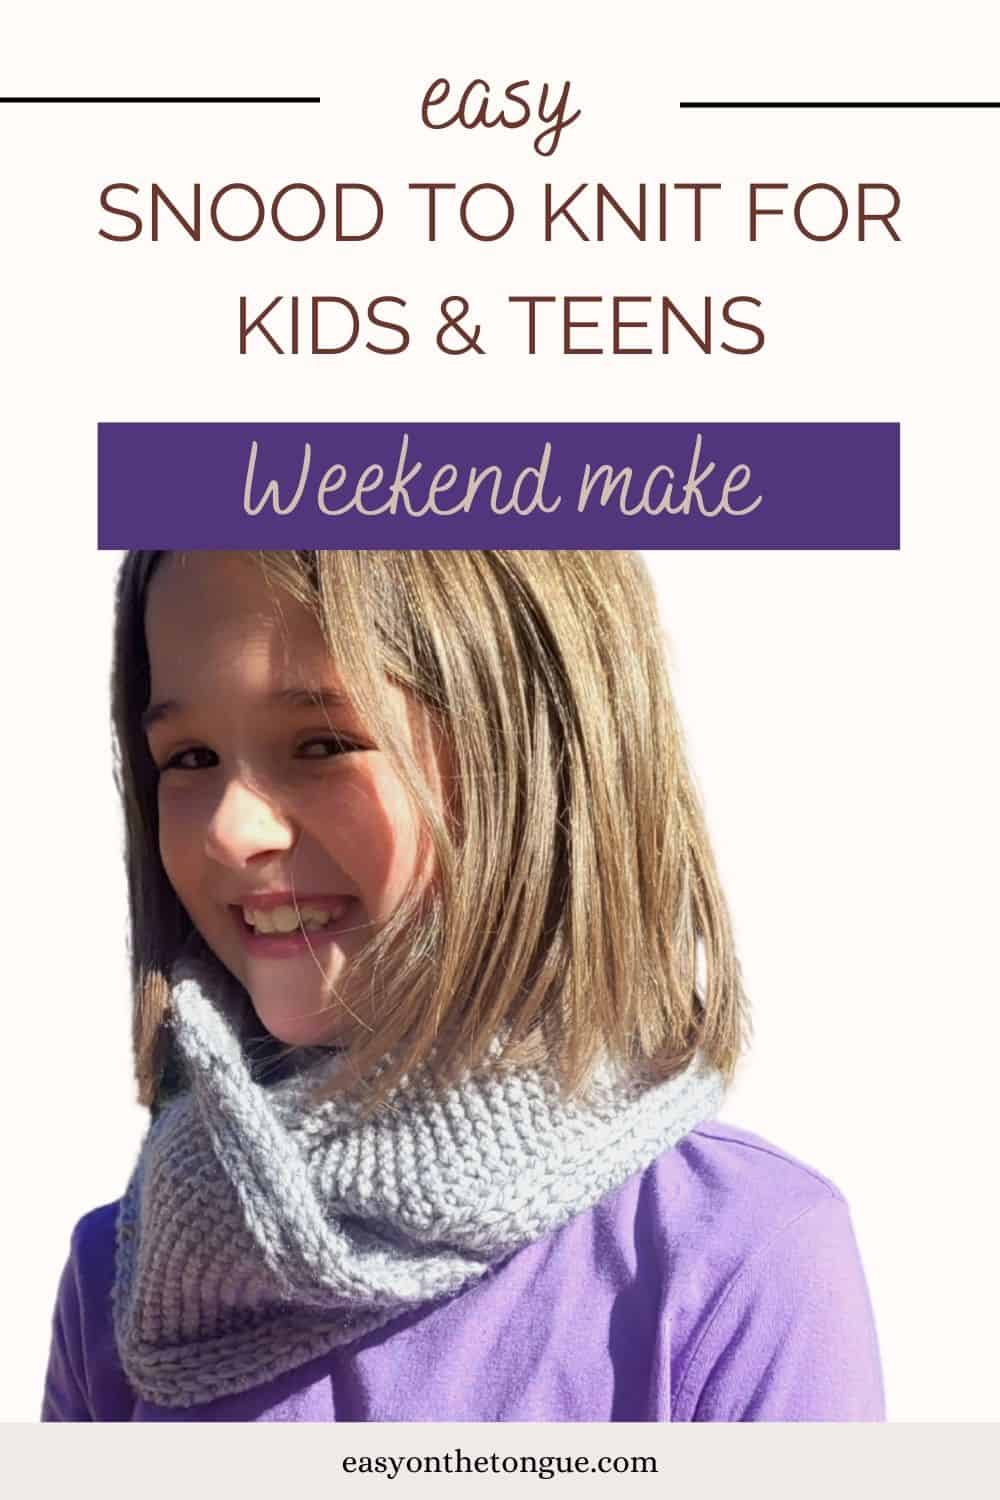 Easy Snood Knit Pattern for Kids and Teens by easyonthetongue.com  Easy Unisex Snood Pattern for Kids and Teens to Knit in a Weekend